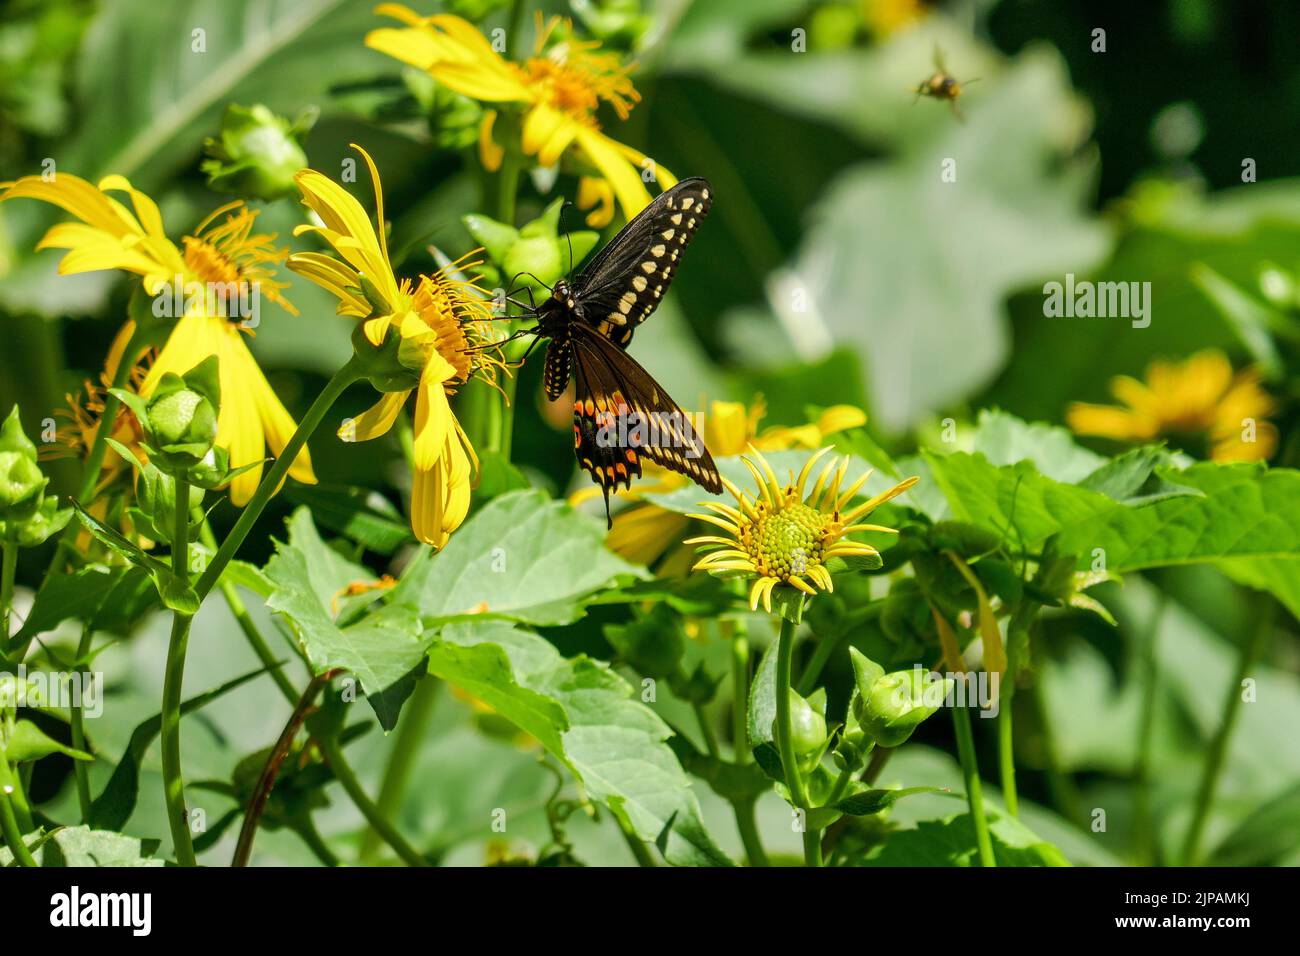 Male eastern black swallowtail butterfly (Papilio polyxenes) on a cup plant flower. Small bee in flight in background. Stock Photo